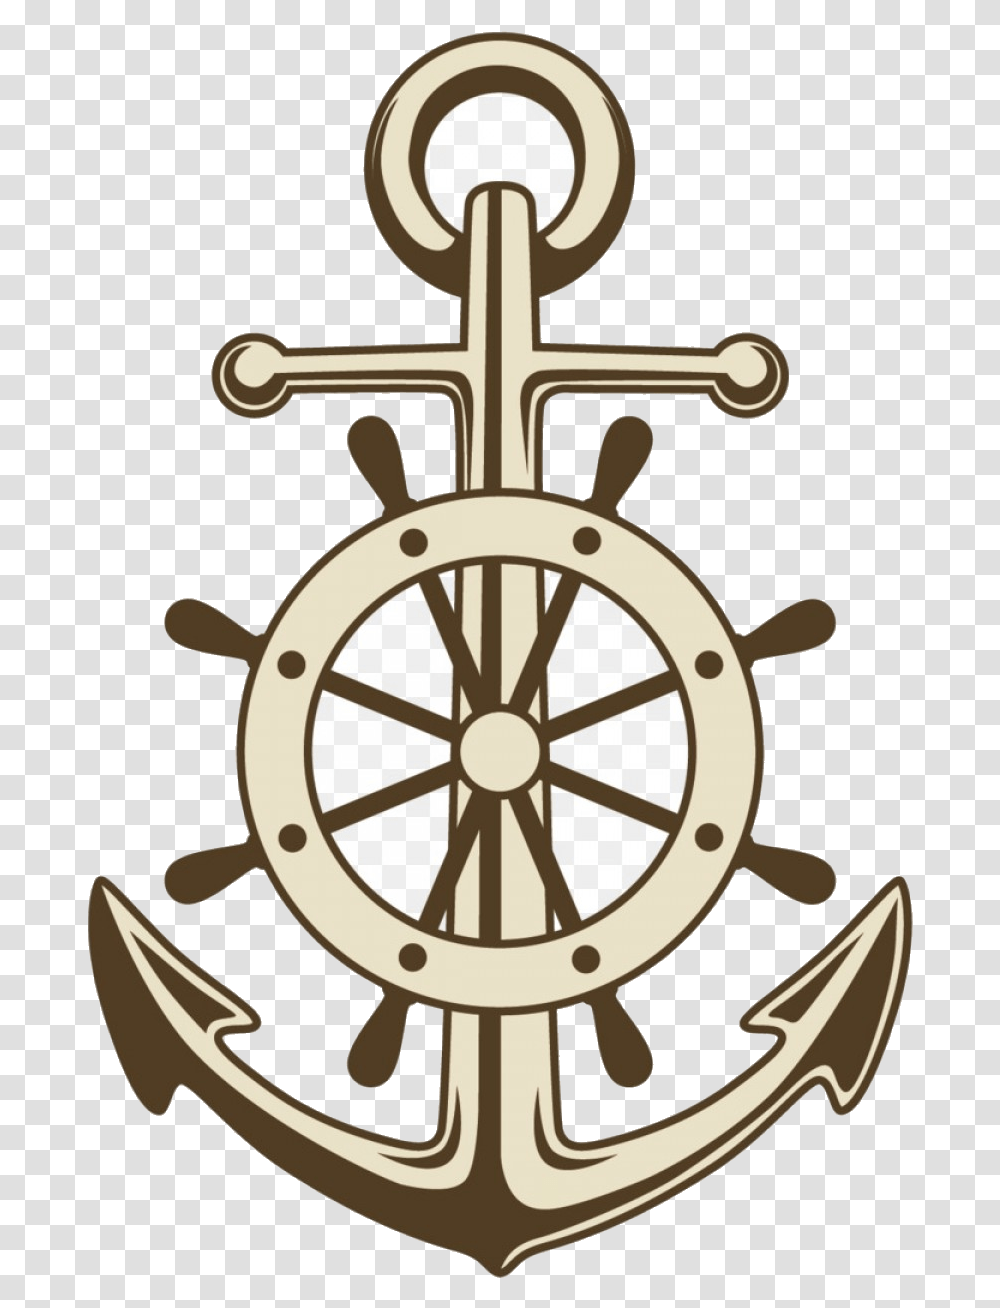 Ship Wheel And Anchor, Cross, Hook, Compass Transparent Png